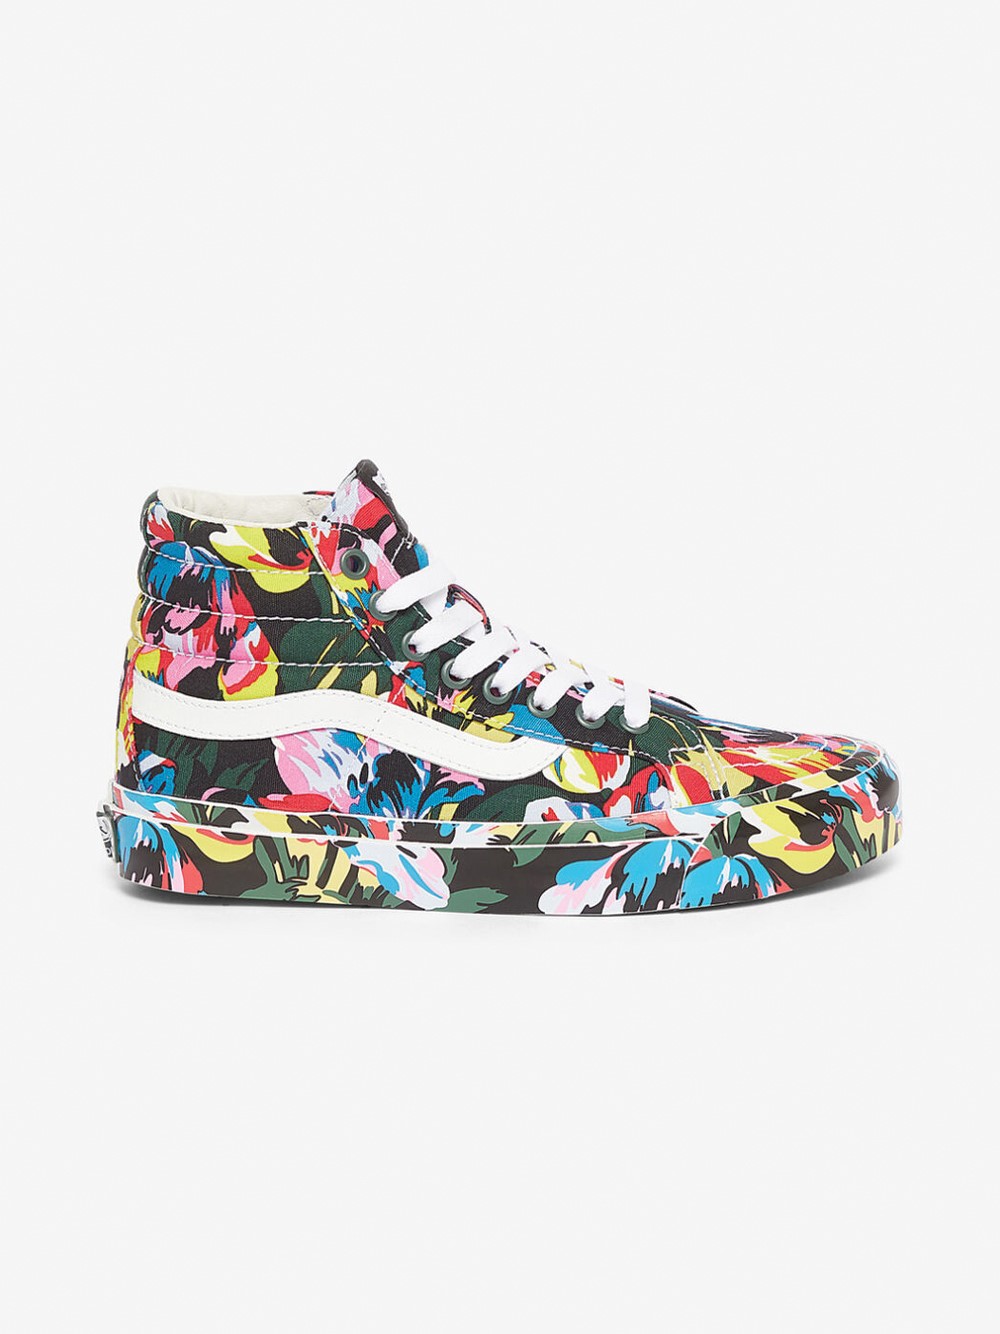 kenzo KENZO X VANS LMTD EDITION SNEAKERS available on montiboutique.com -  35006